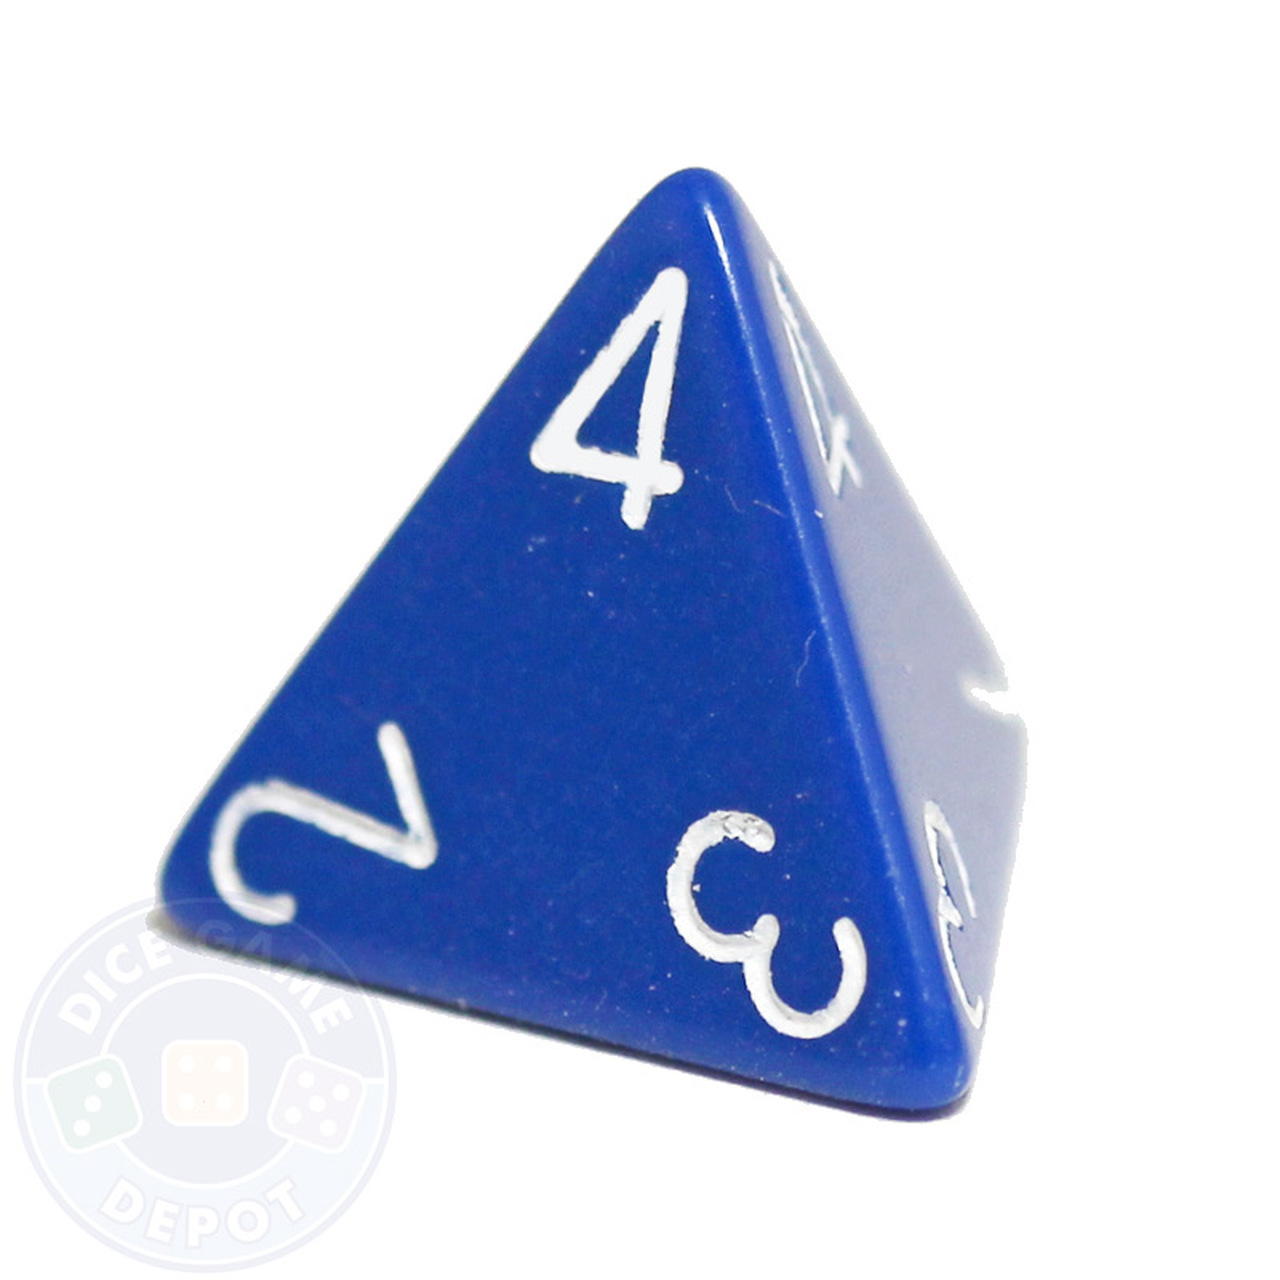 4 sided dice